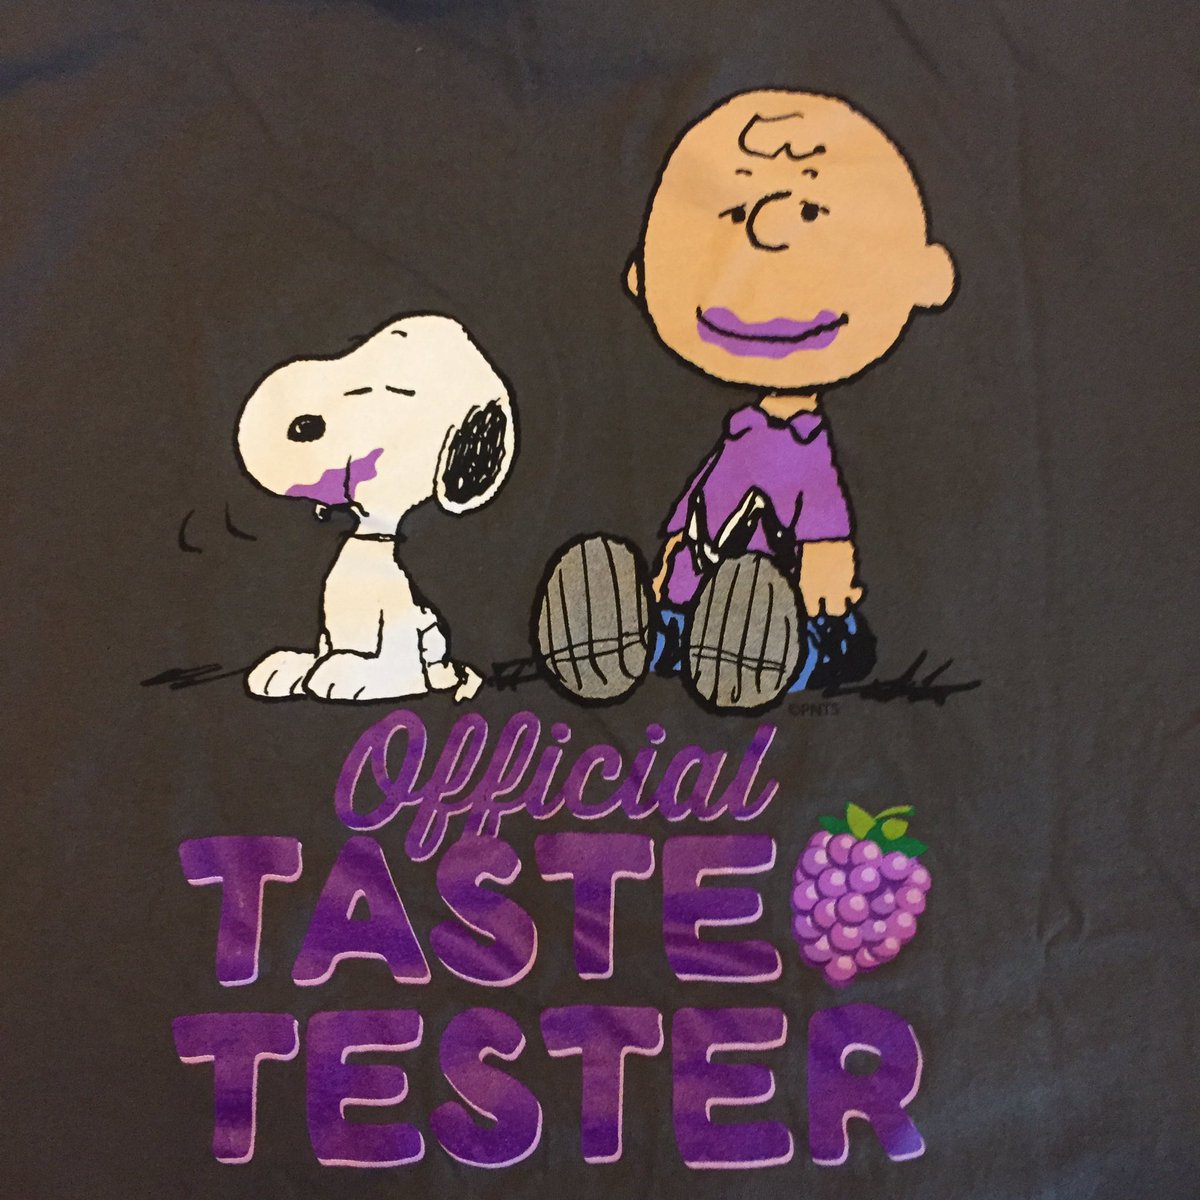 Day 103 and it’s the Boysenberry Festival at Knott’s for 2 more weeks.  So get going and get some yummy food.  #knottsberryfarm #knottsboysenberryfestival #newyeartshirtchallenge #graphictees #peanutsgang